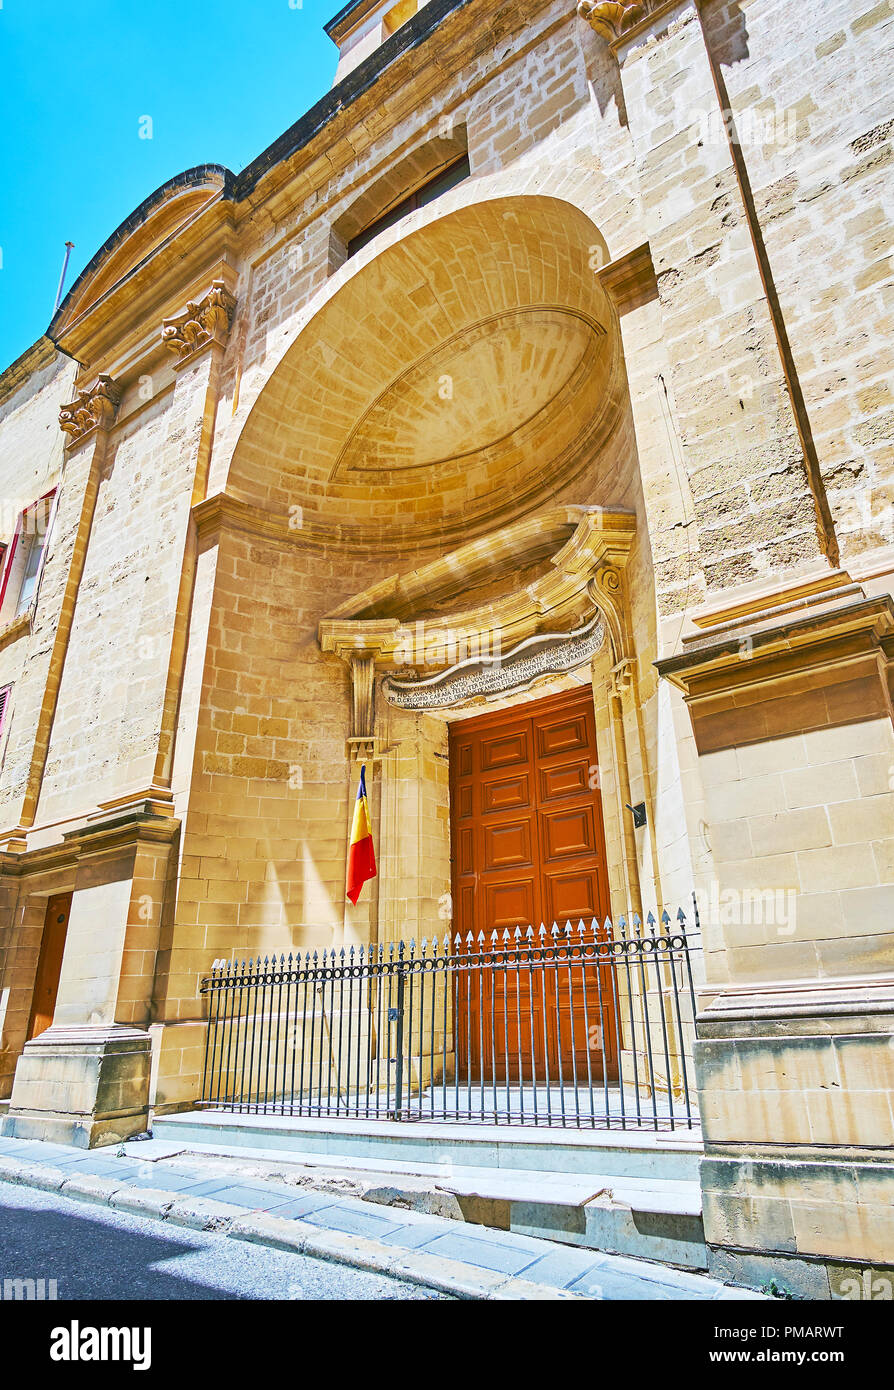 The facade of monumental St Roque church, located in St Ursula street of Valletta, Malta. Stock Photo